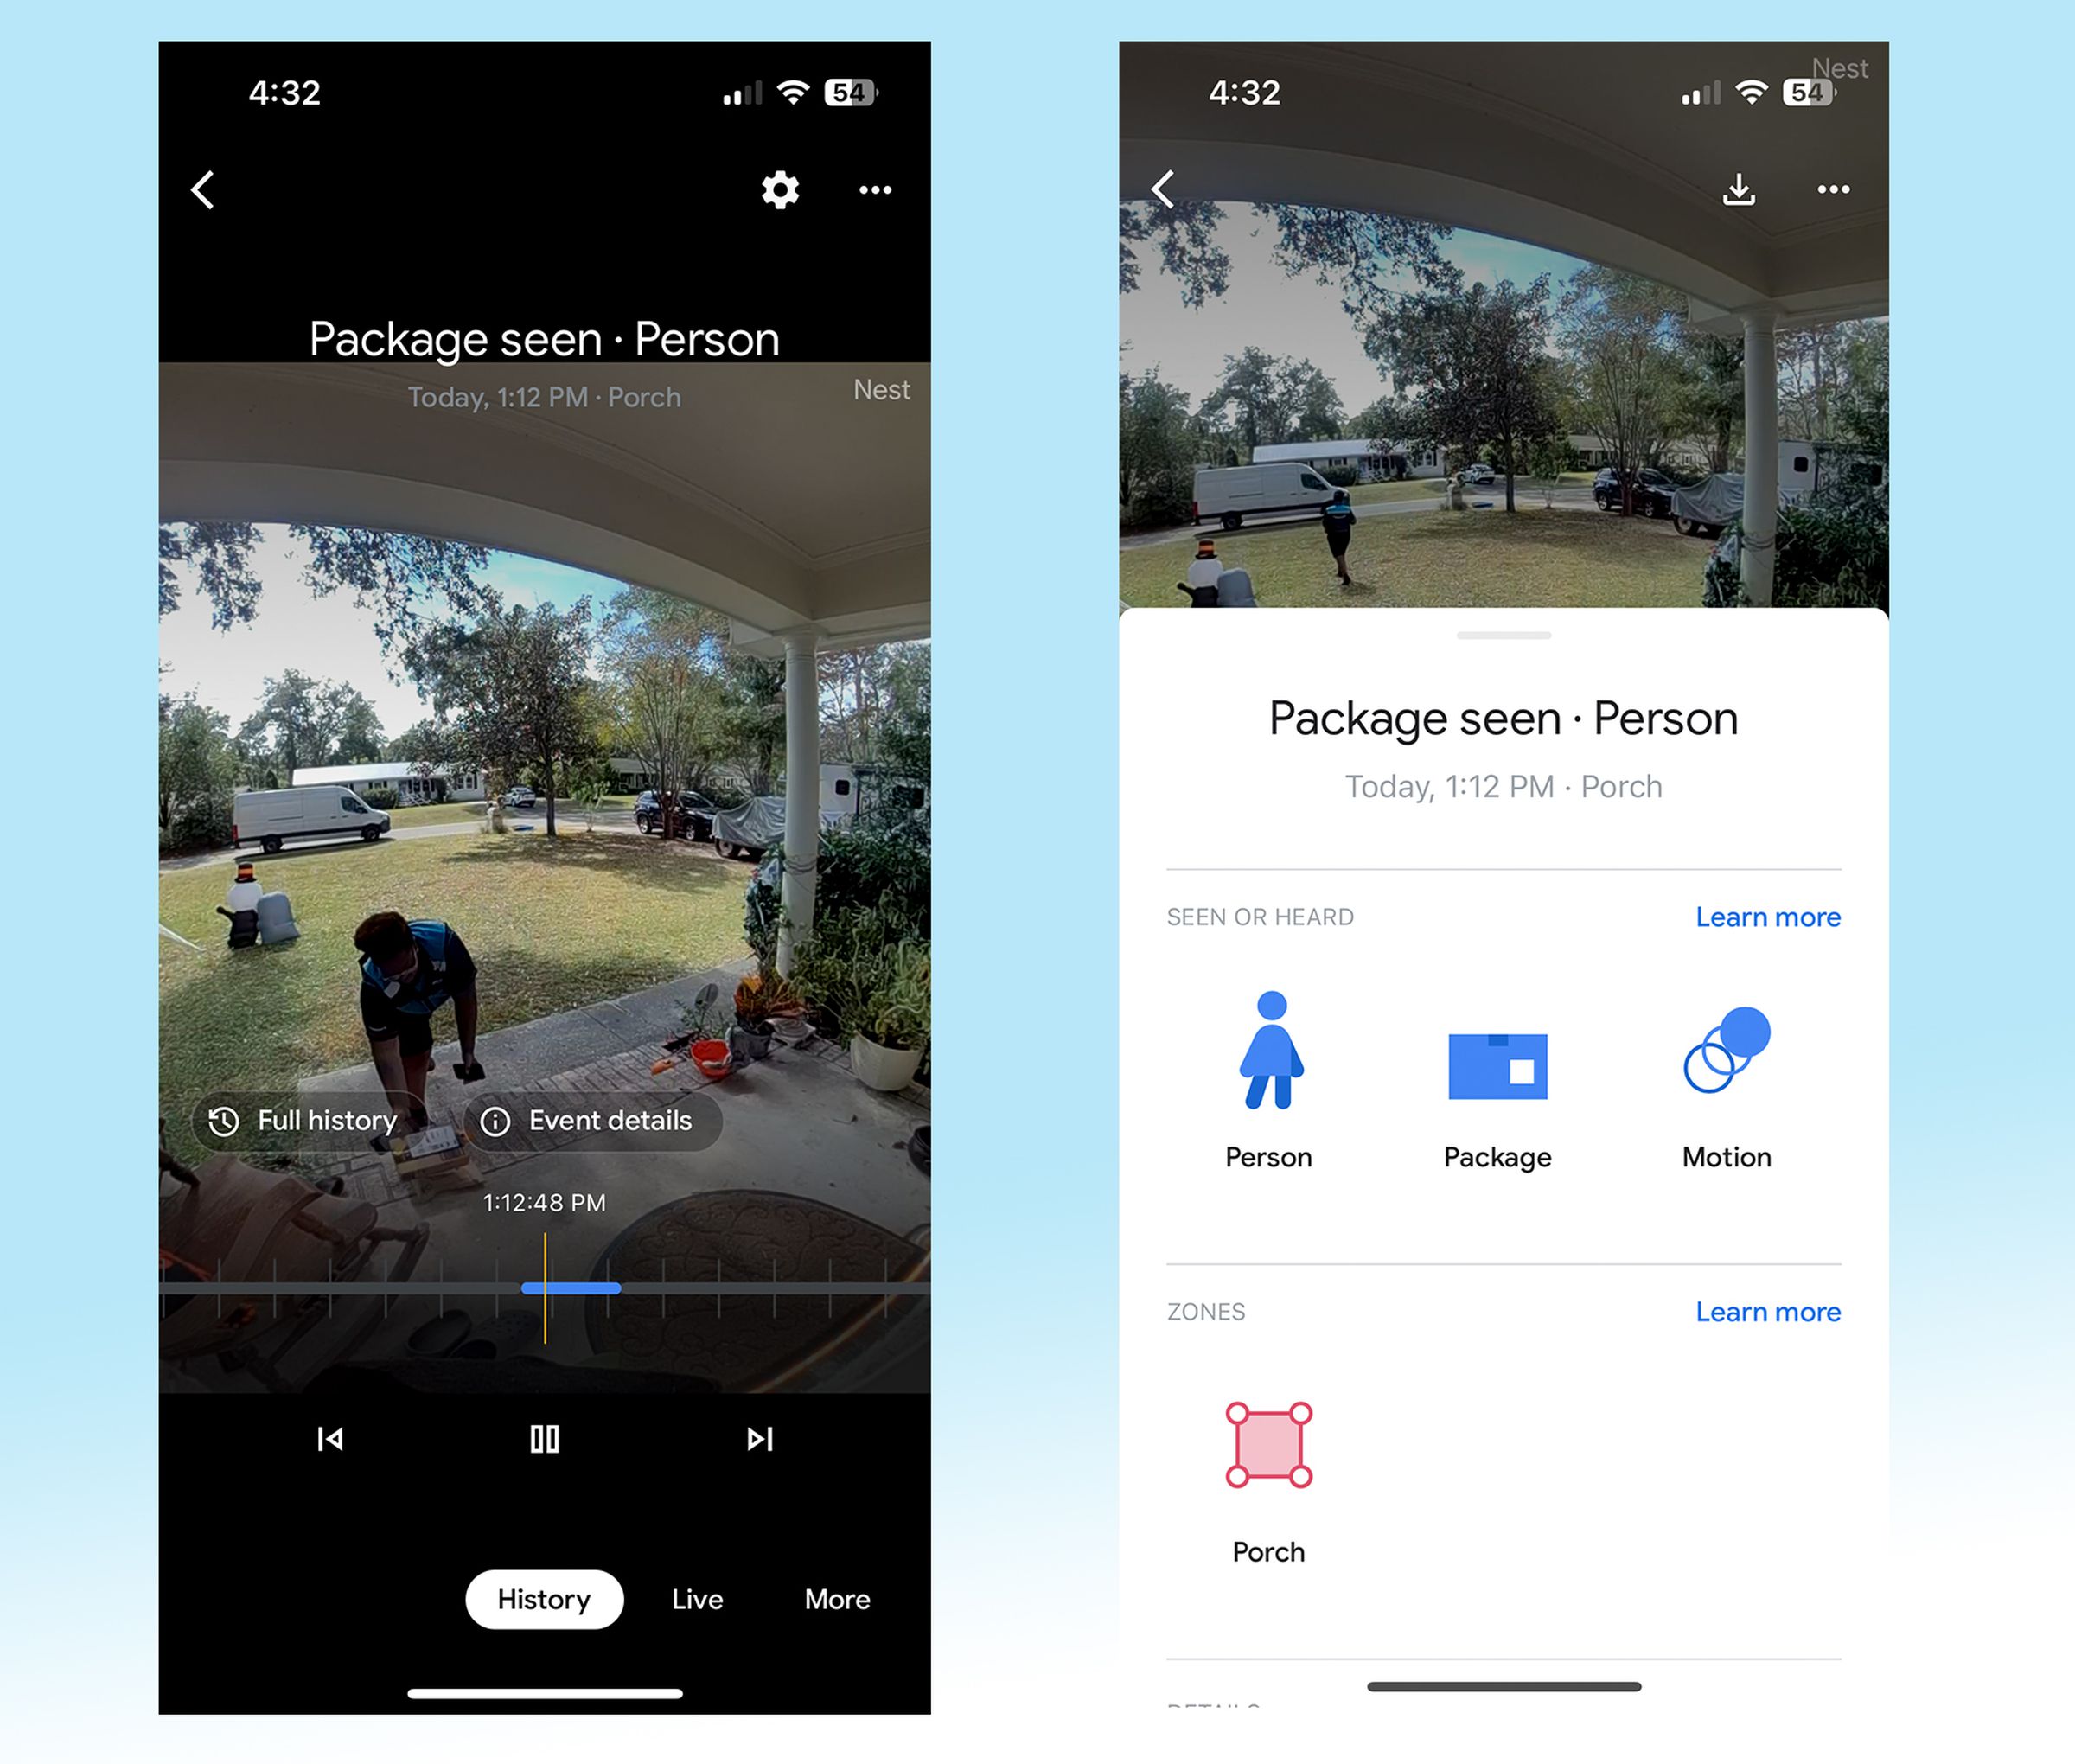 Two screenshots of the Nest app. On left, a still from a recording of a delivery person dropping off a package; on the right, a “Package seen - person” notification showing that the camera sensed a person, a package, and motion.